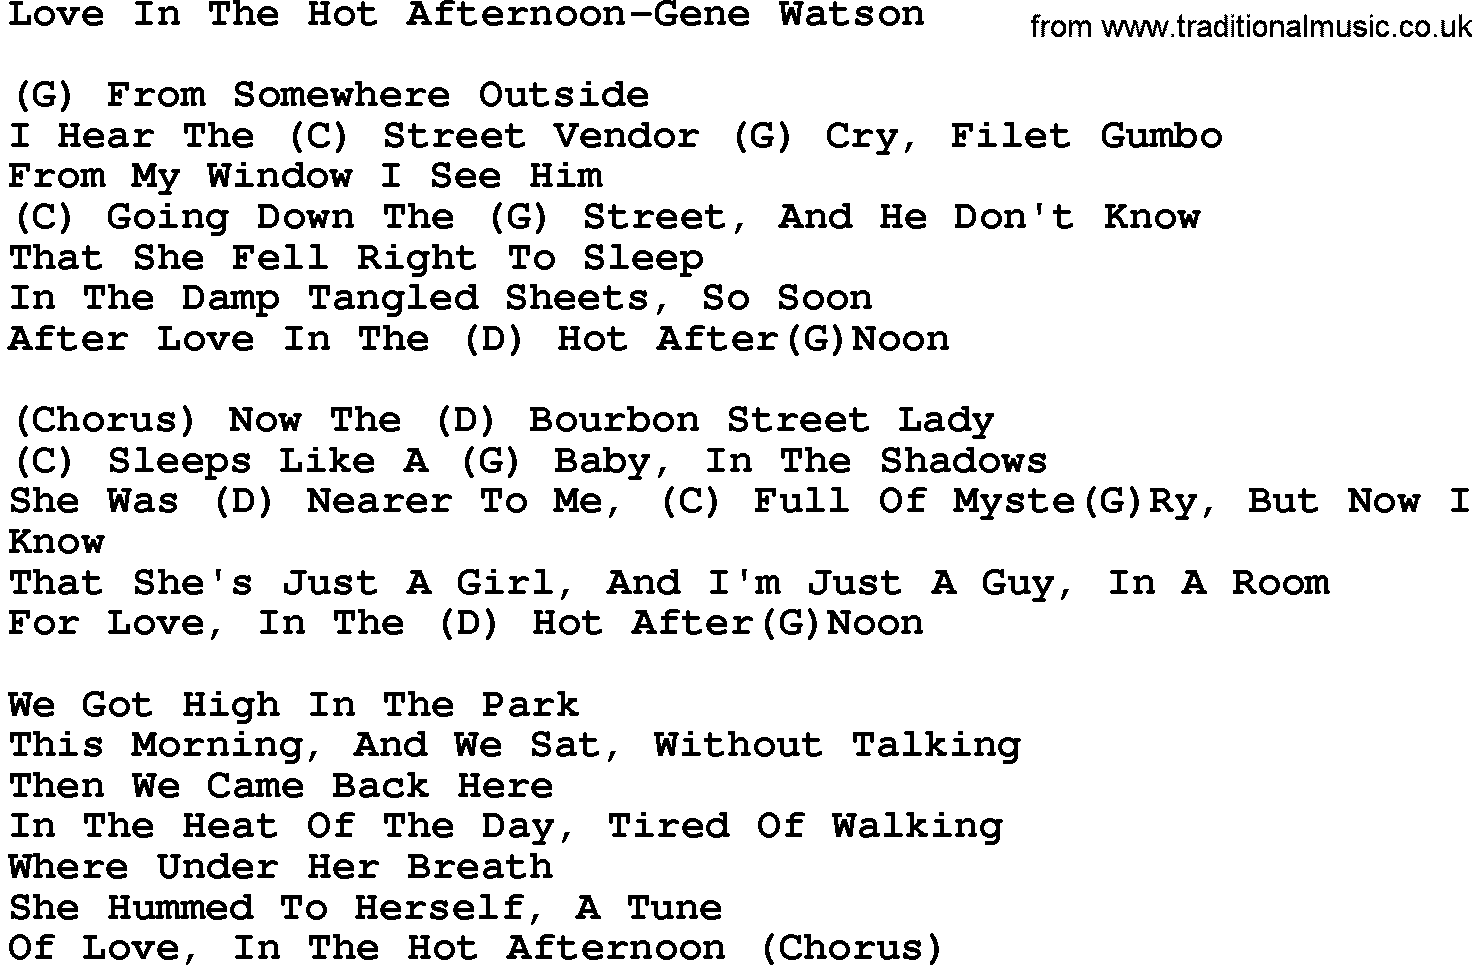 Country music song: Love In The Hot Afternoon-Gene Watson lyrics and chords